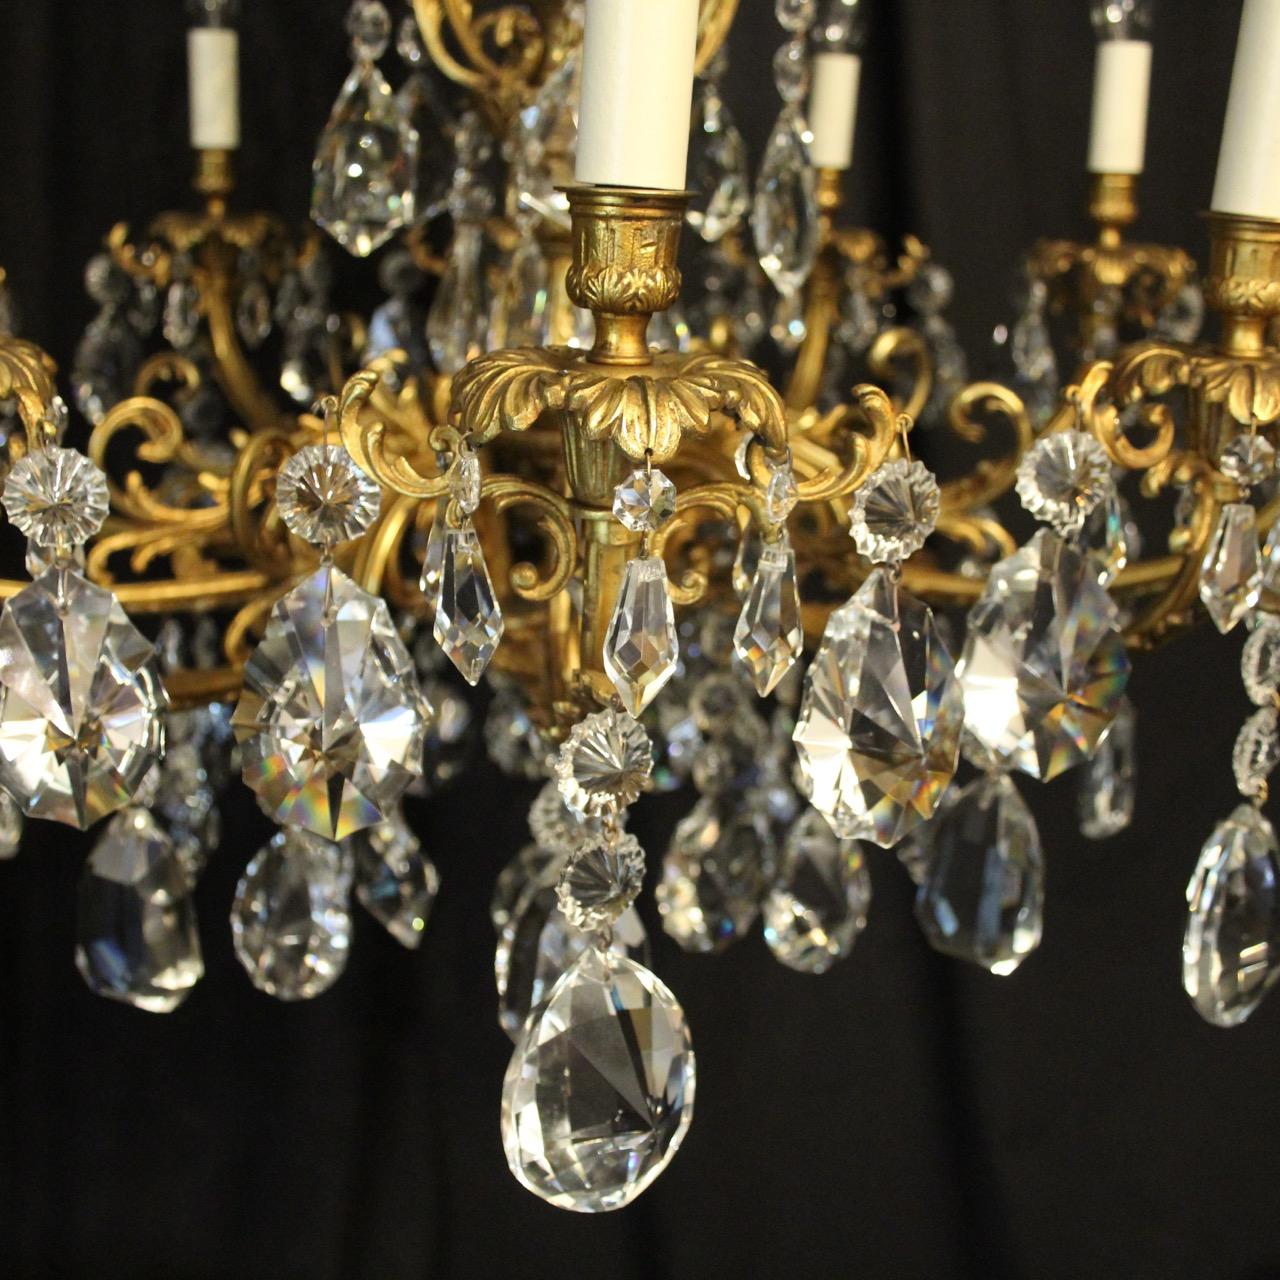 A quality French gilded bronze and crystal ten-light antique chandelier, the ornate acanthus leaf scrolling arms with trumpet reeded bobeche drip pans and bulbous candle sconces, issuing from an foliated central column with an elaborate mid and top